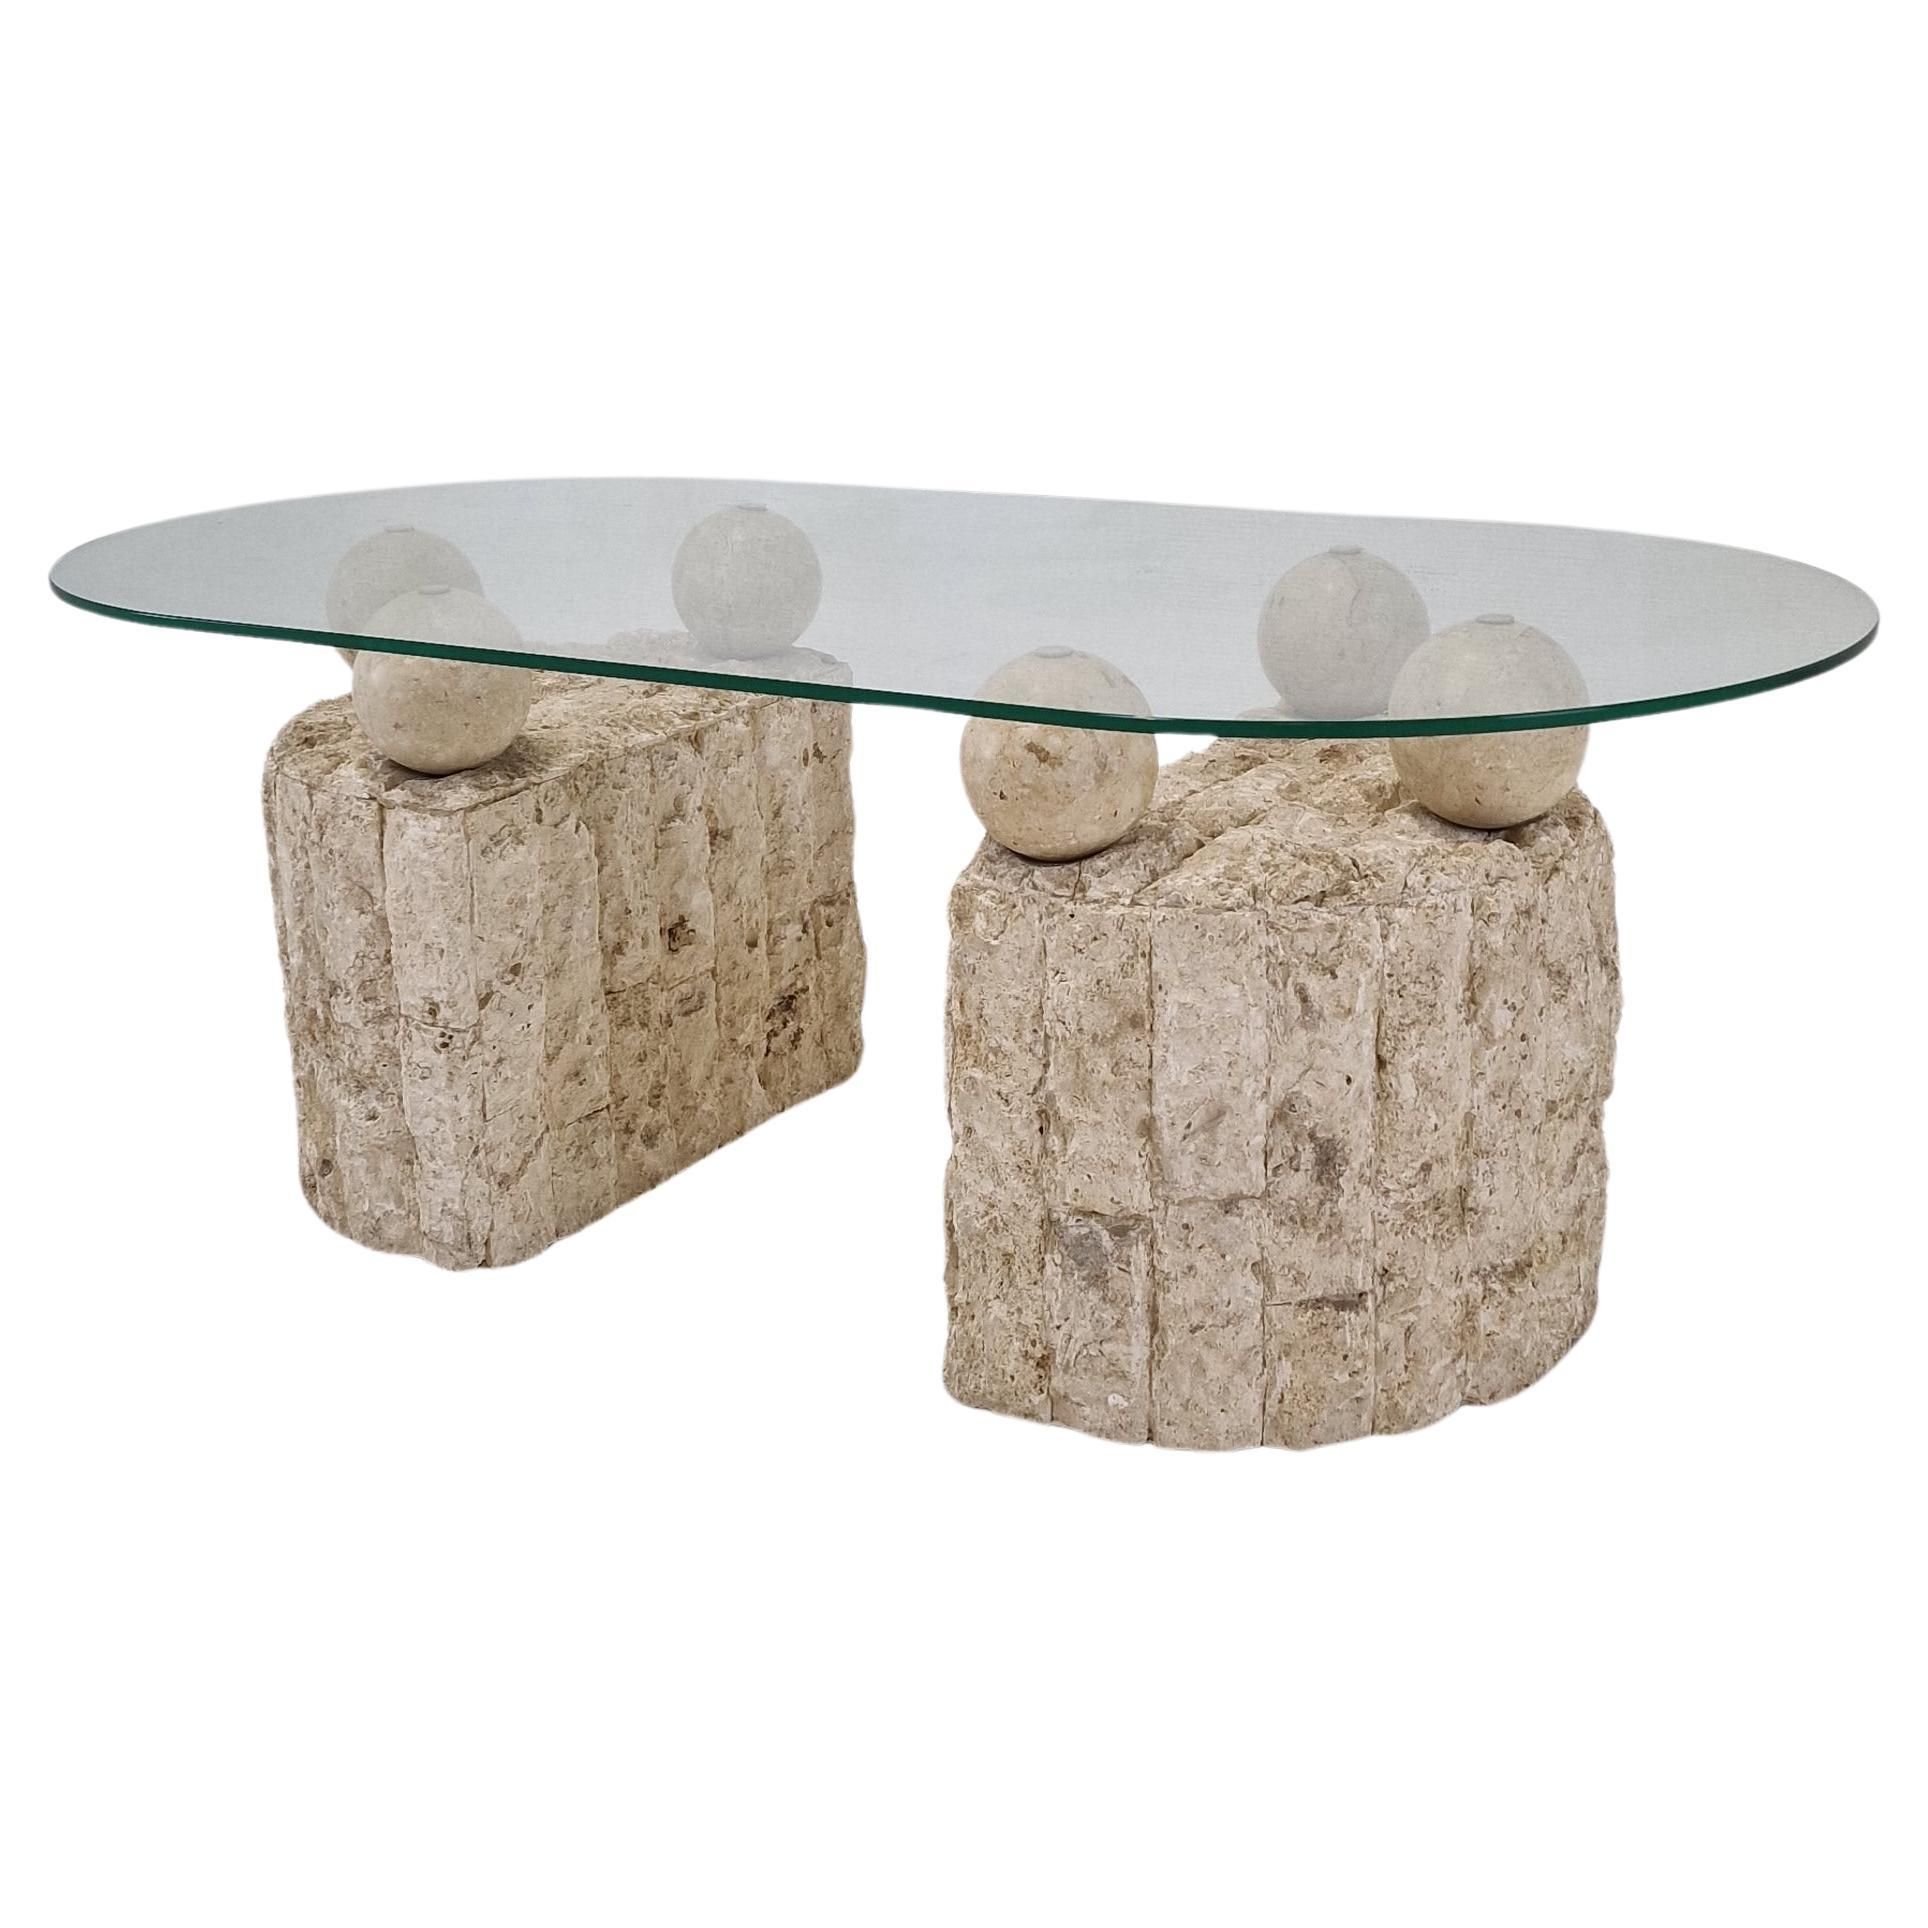 Magnussen Ponte Mactan Stone Coffee or Fossil Stone Table, 1980s For Sale